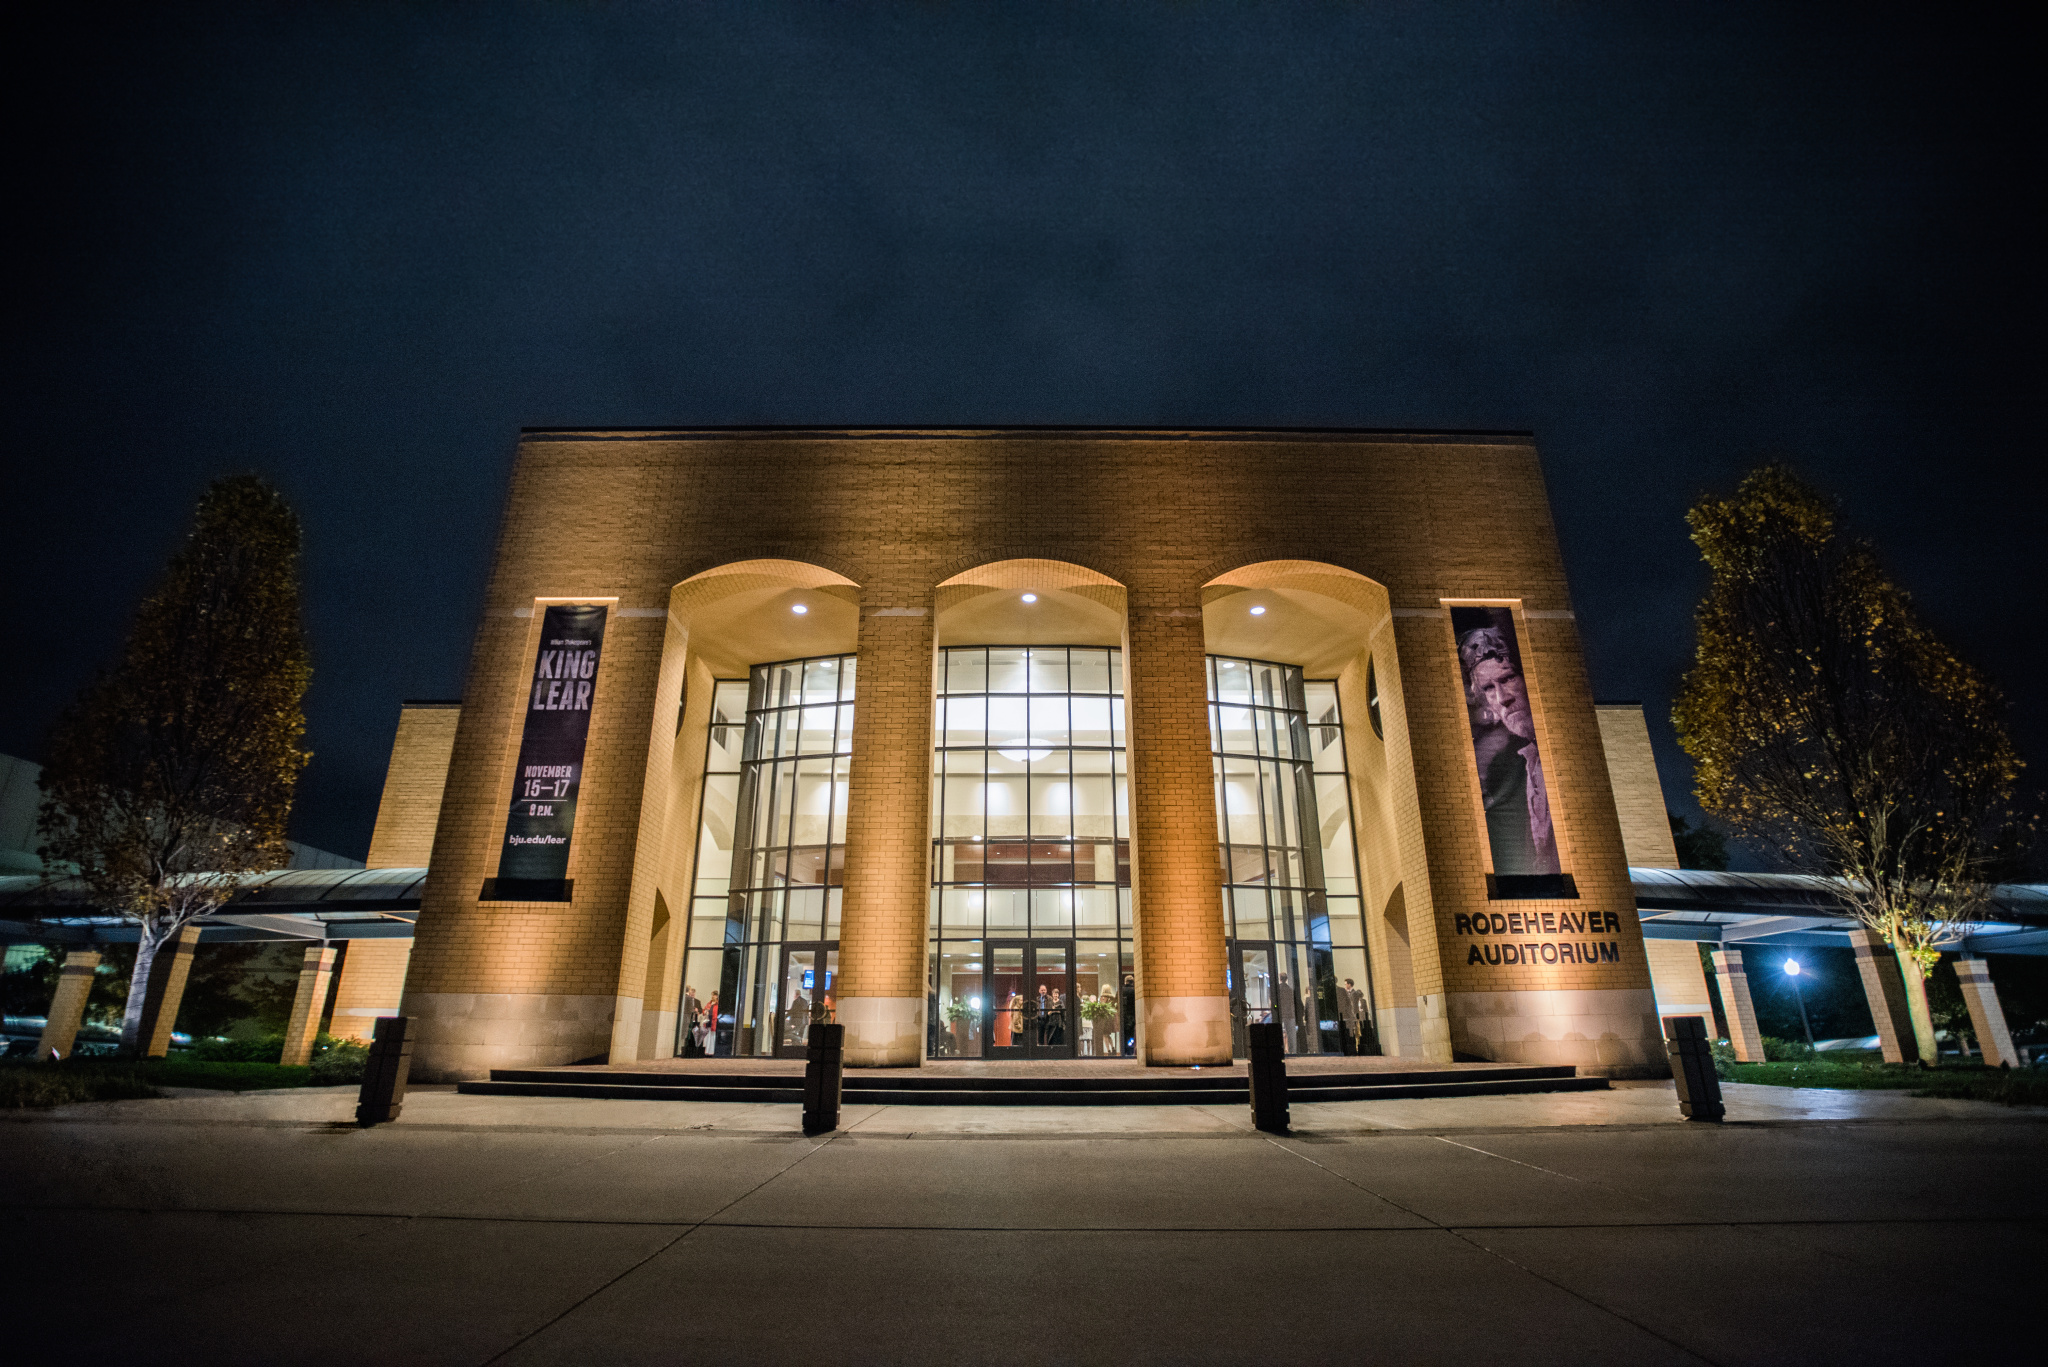 Rodeheaver Auditorium during the 2018 BJU production of King Lear (photo by Derek Eckenroth)